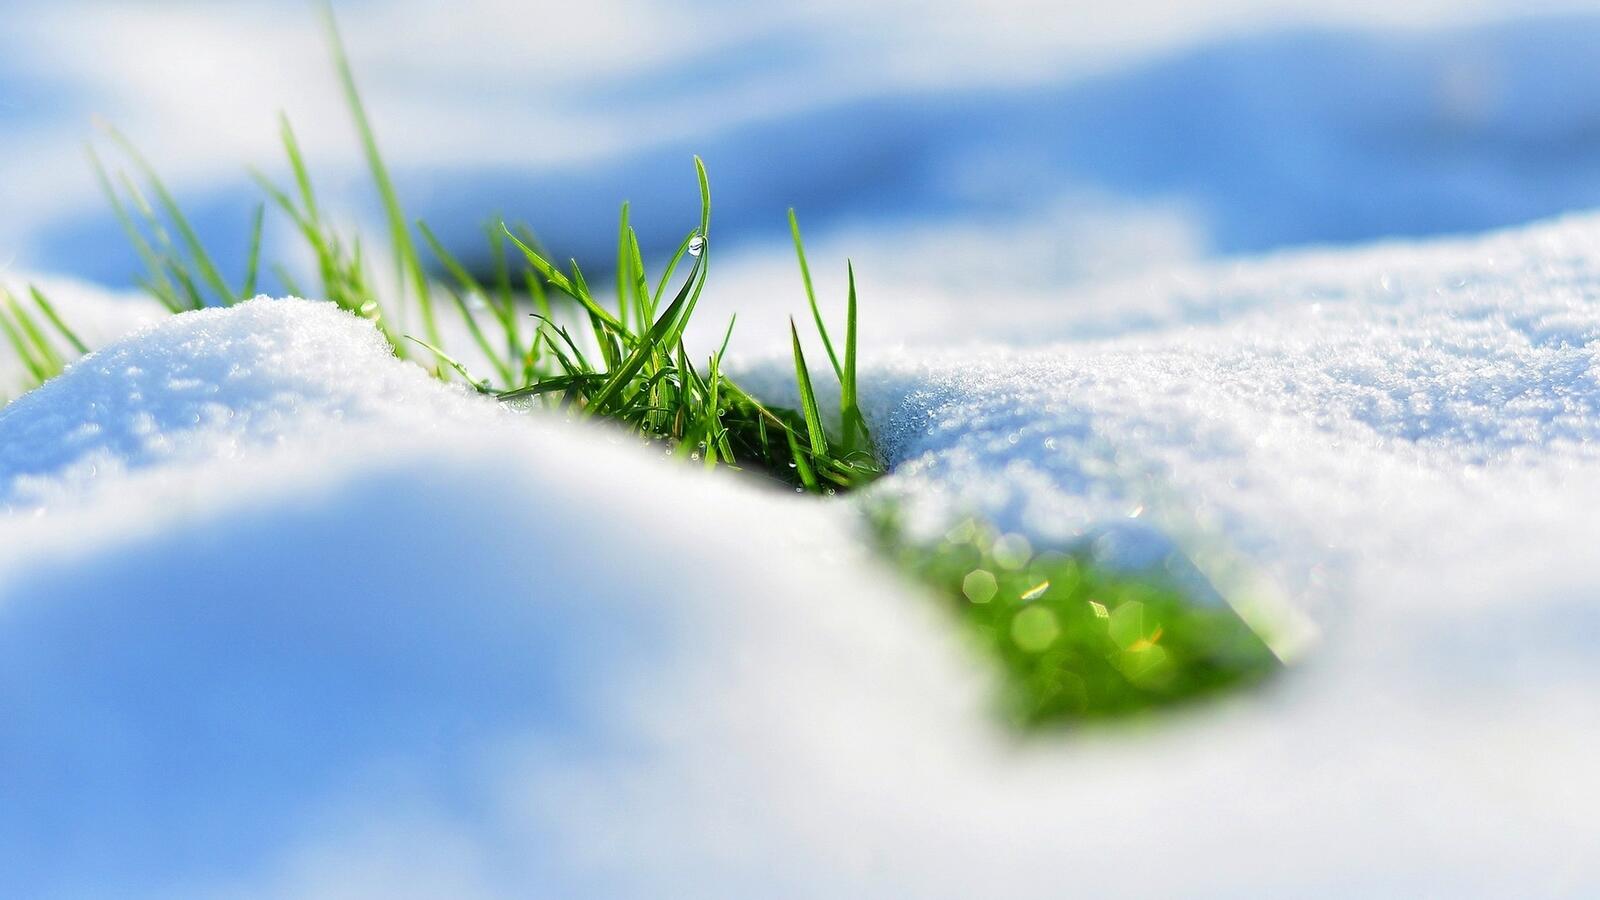 Wallpapers grass drops of water snow on the desktop